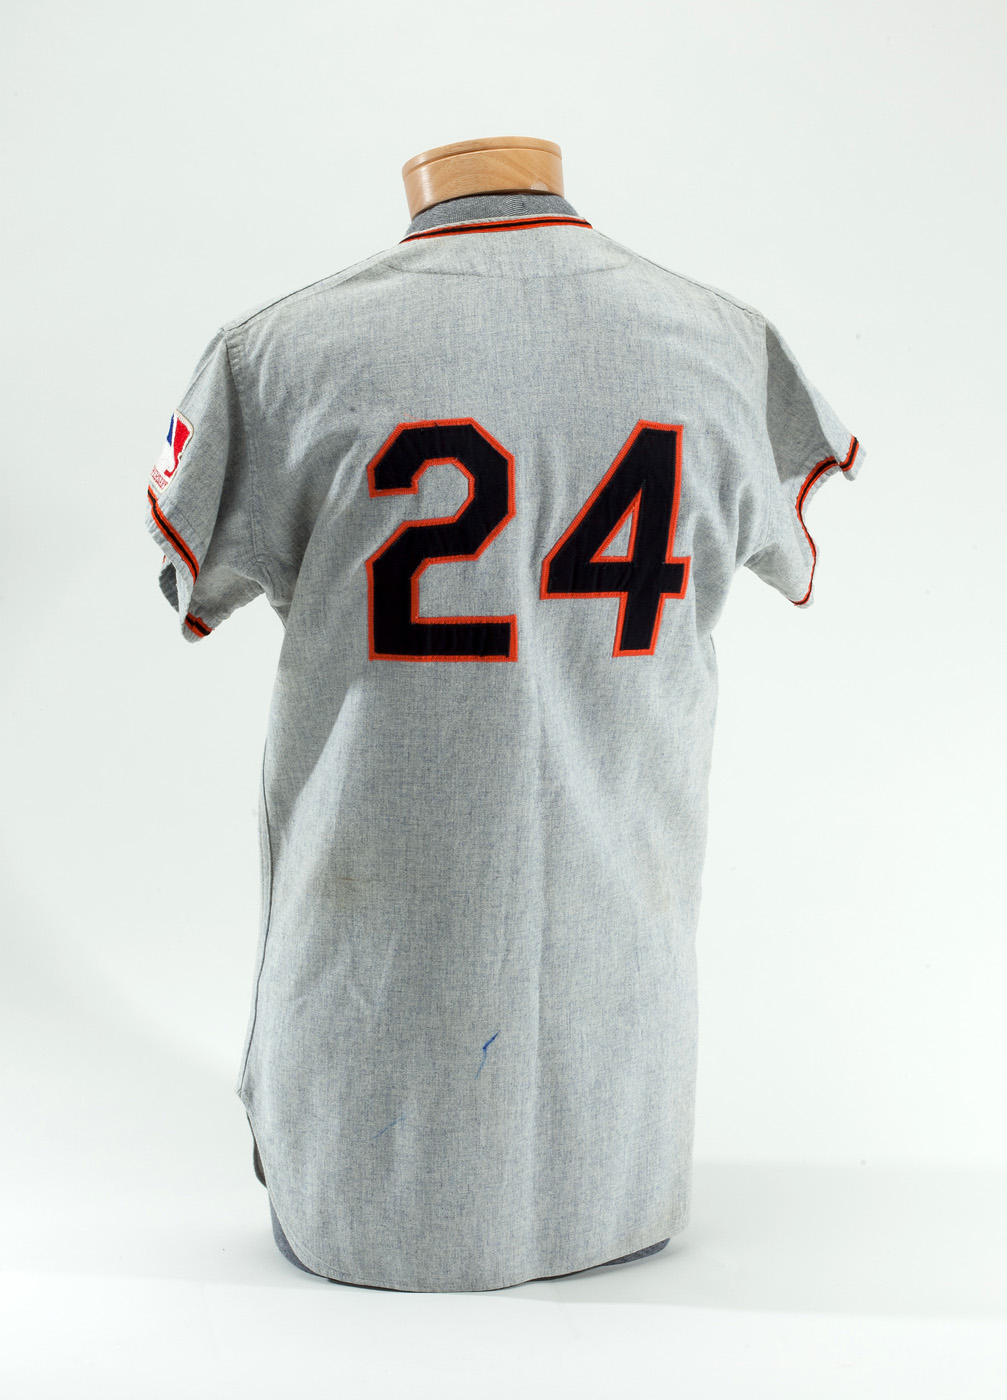 1966 Willie Mays Game Worn San Francisco Giants Jersey, MEARS